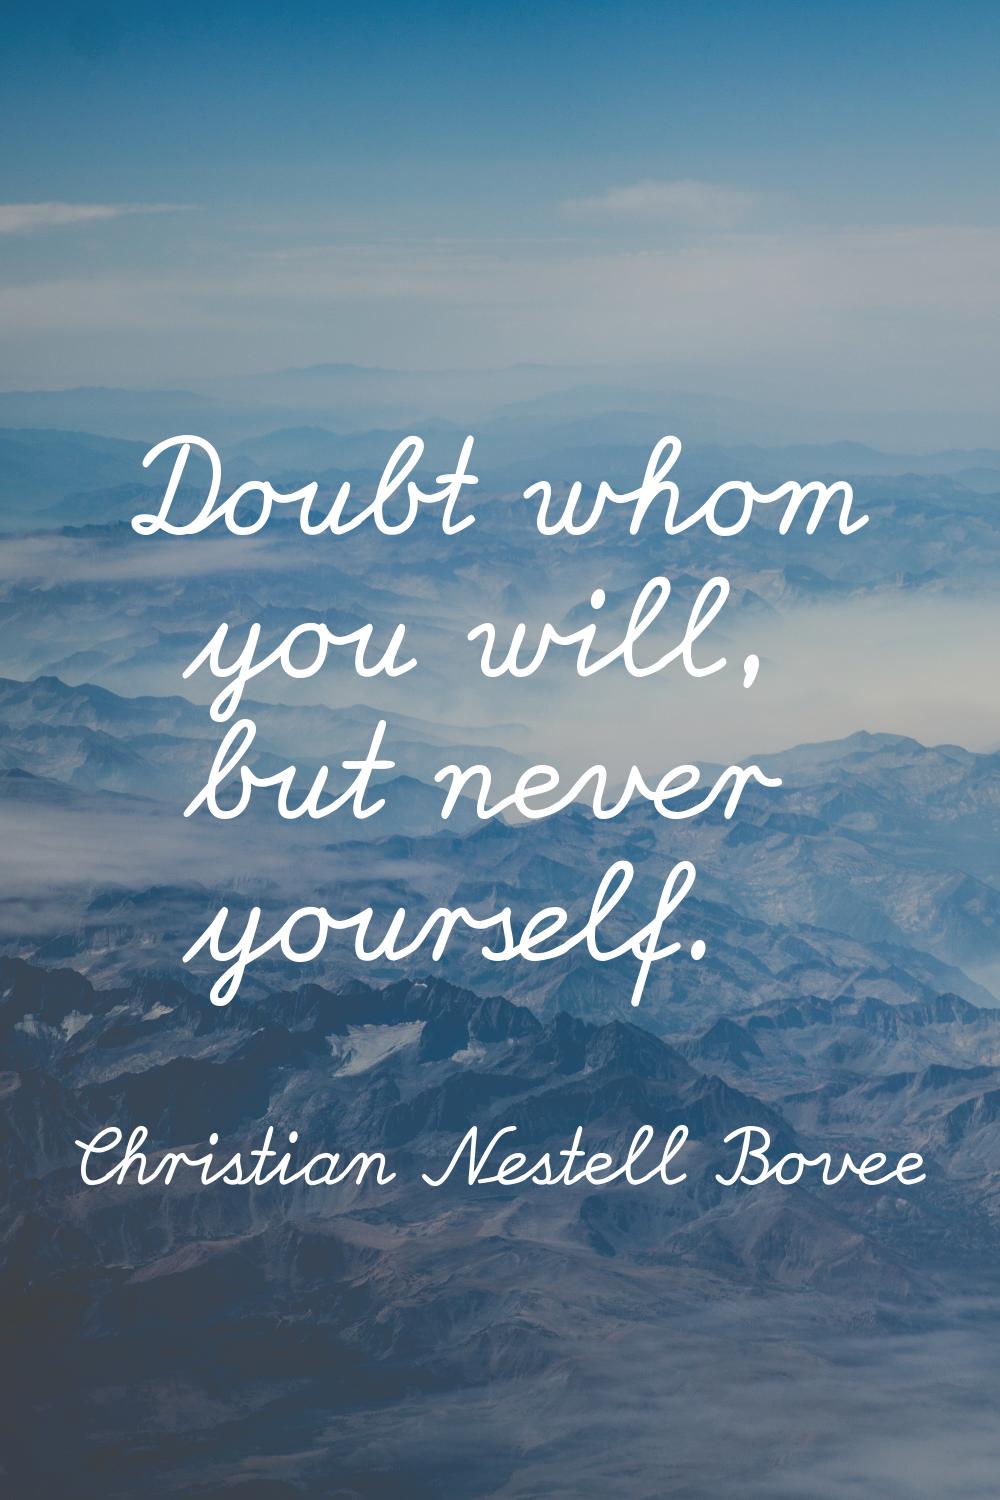 Doubt whom you will, but never yourself.